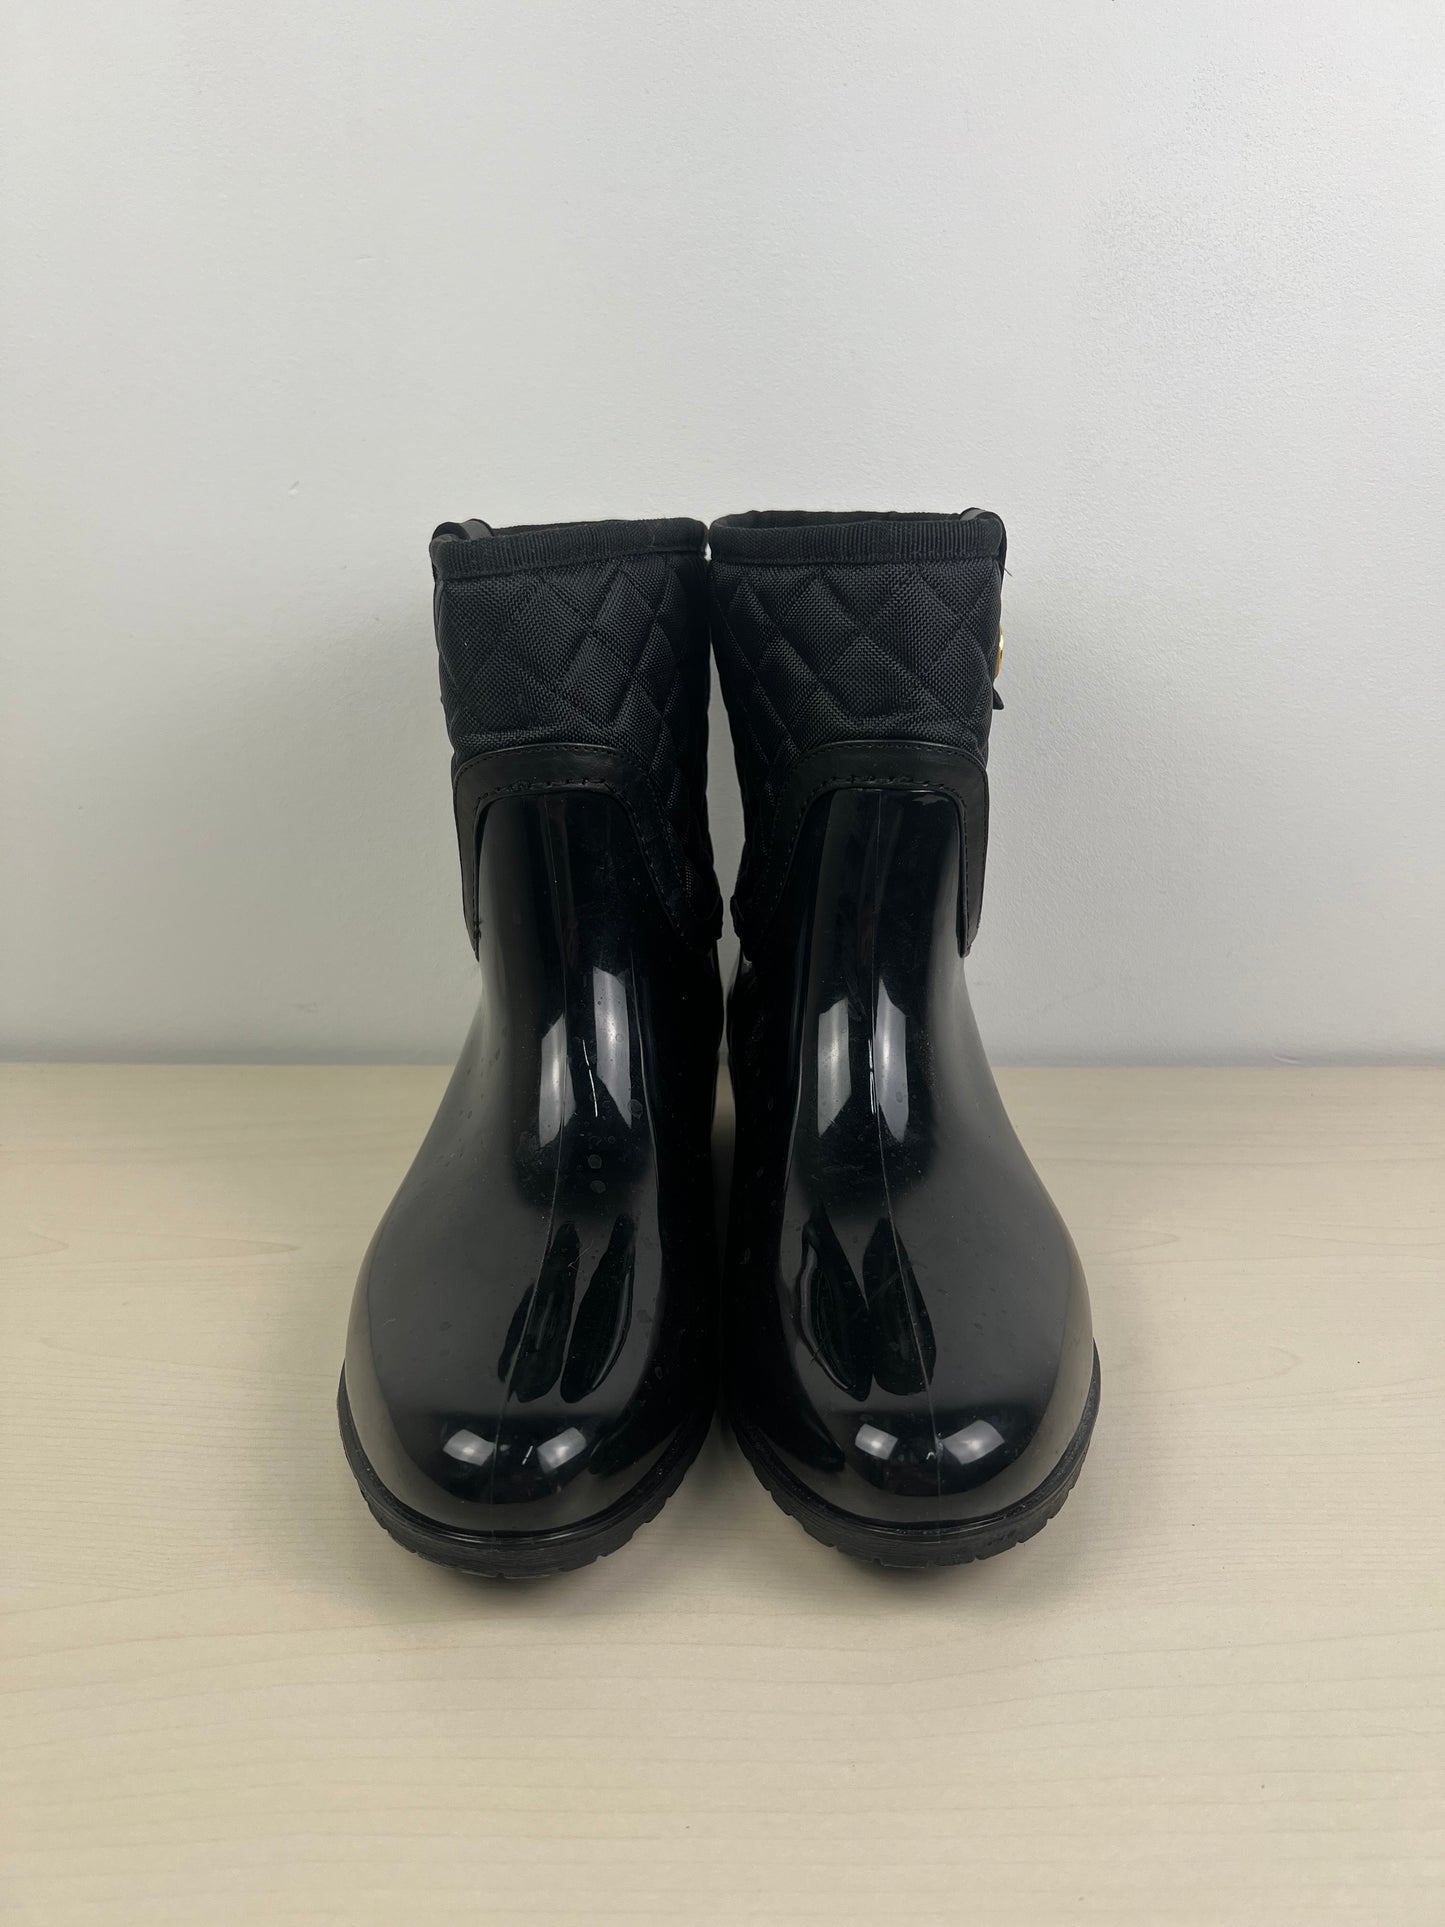 Boots Rain By Tommy Hilfiger  Size: 9